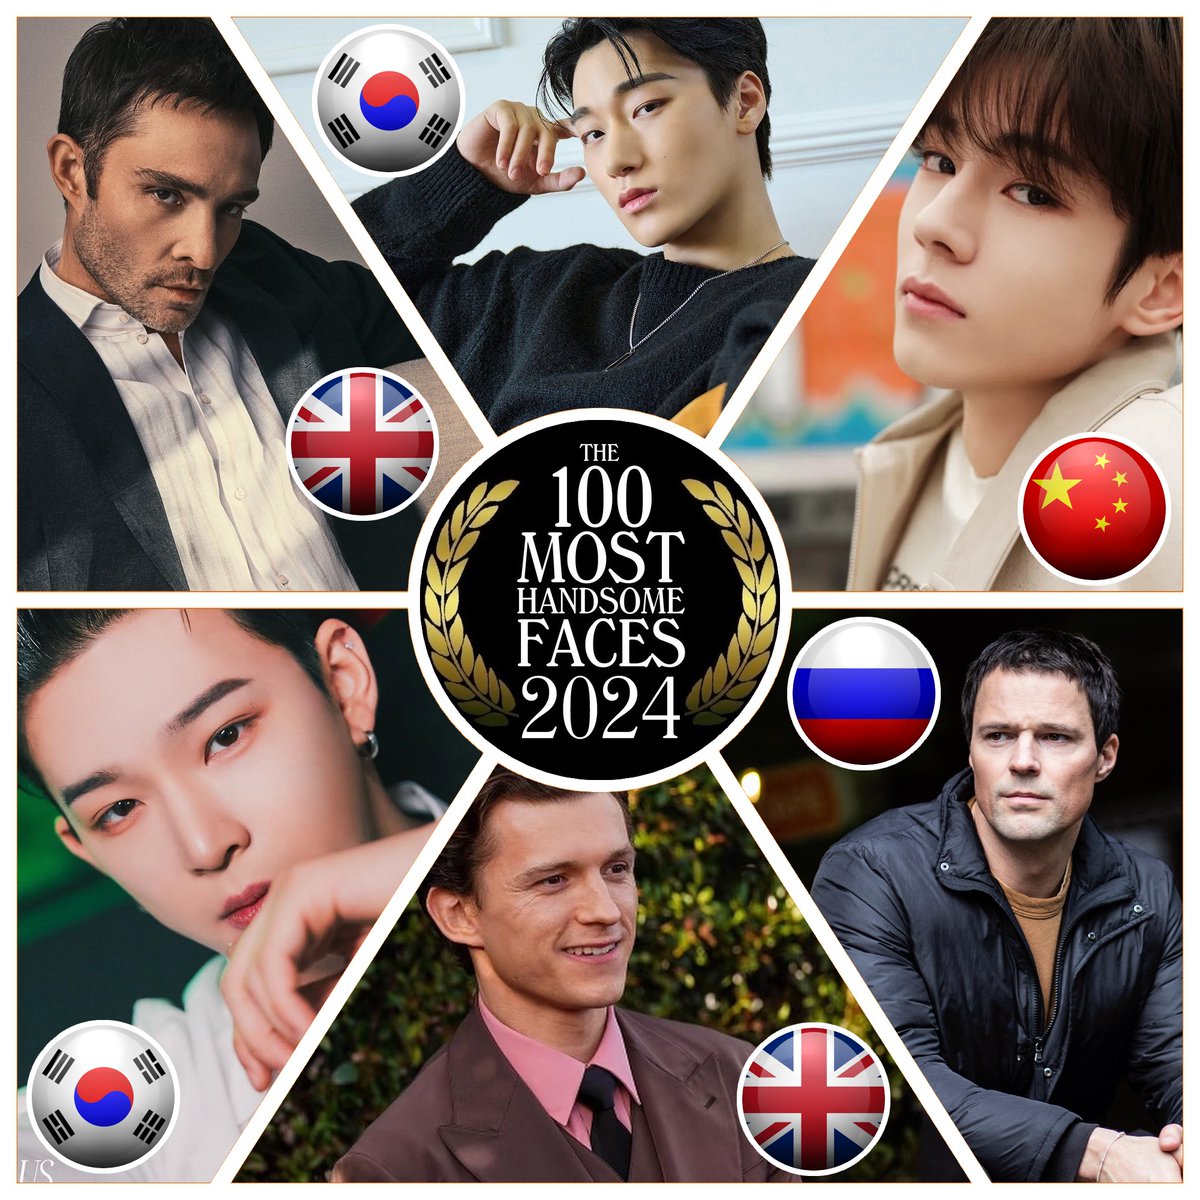 Which Face Should Be Nominated? These are the faces nominated today. Nominate & Vote for the Top 100 of 2024 -patreon.com/tccandler #tccandler #100faces2024 #EdWestwick #san #ateez #ollie #LOONG9 #leedo #ONEUS #TomHolland #danilakozlovsky